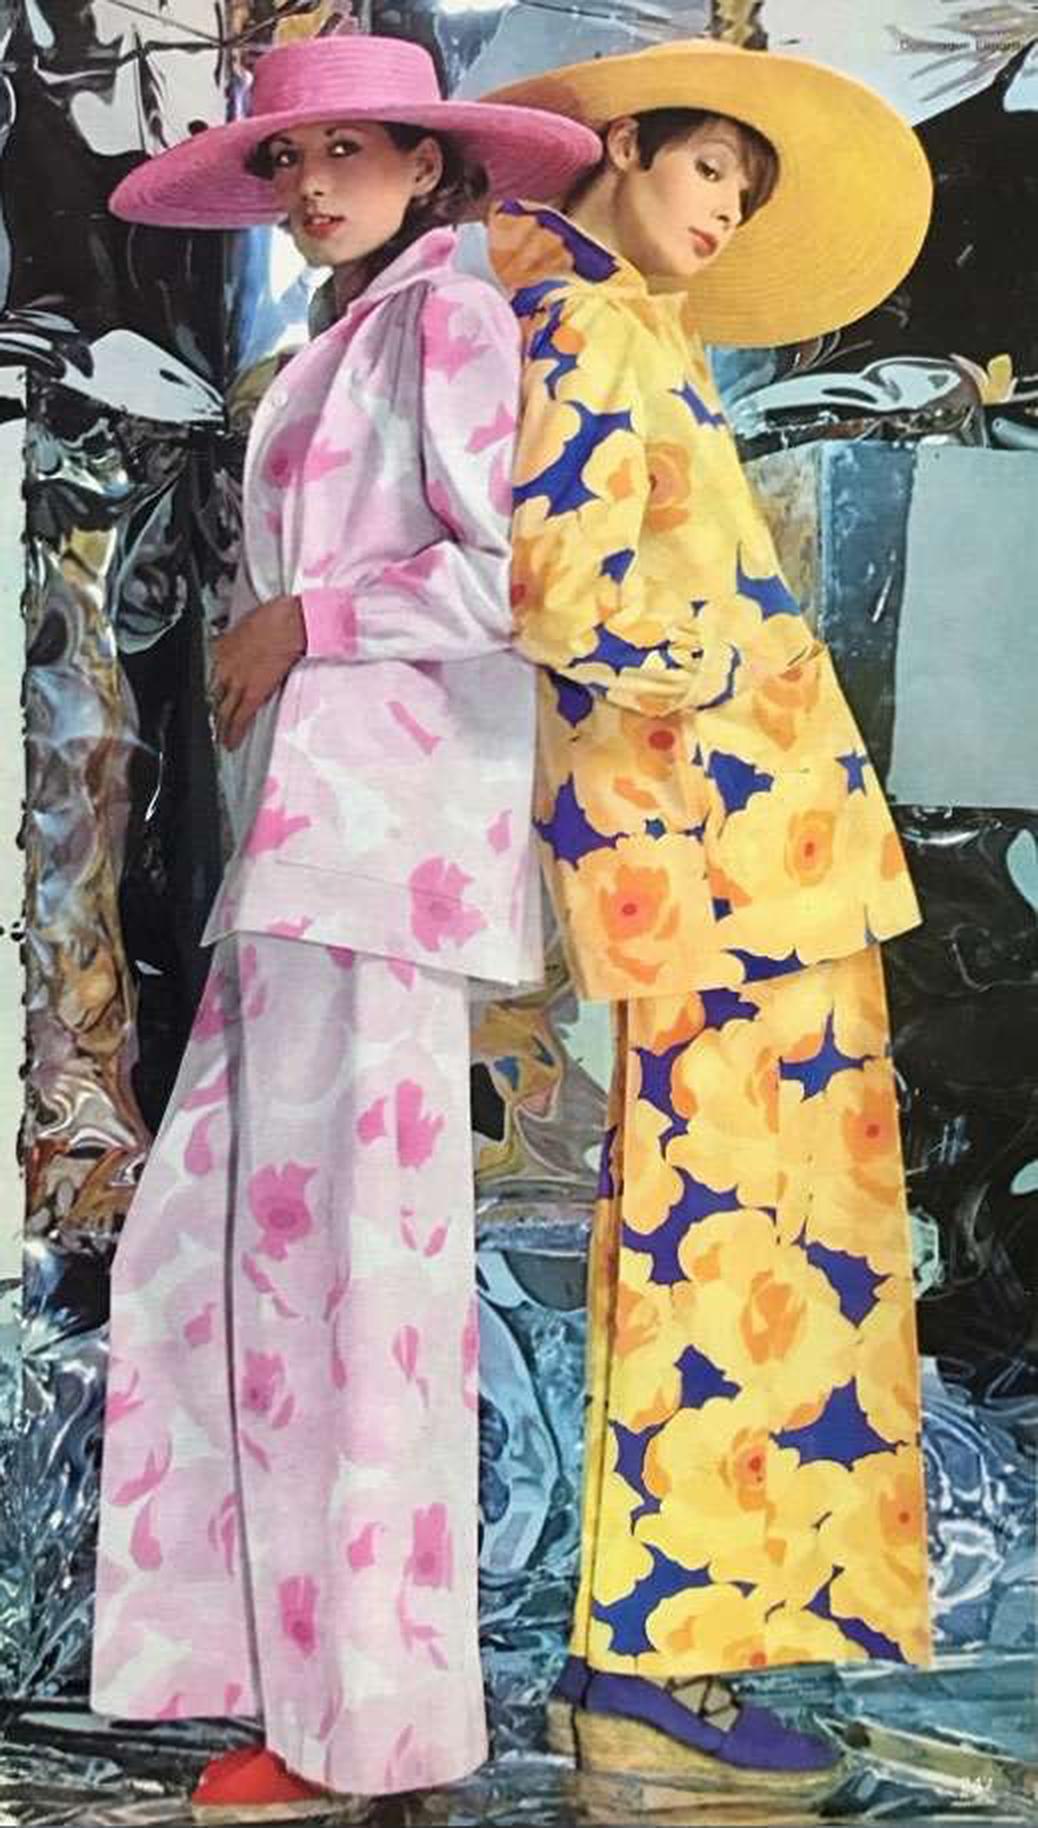 Breathtaking Yves Saint Laurent designer ensemble from his 1972 documented Spring/Summer collection. Such a rarity to find both pieces together in almost unworn condition! The set is insanely chic with its large-scale yellow and purple floral print